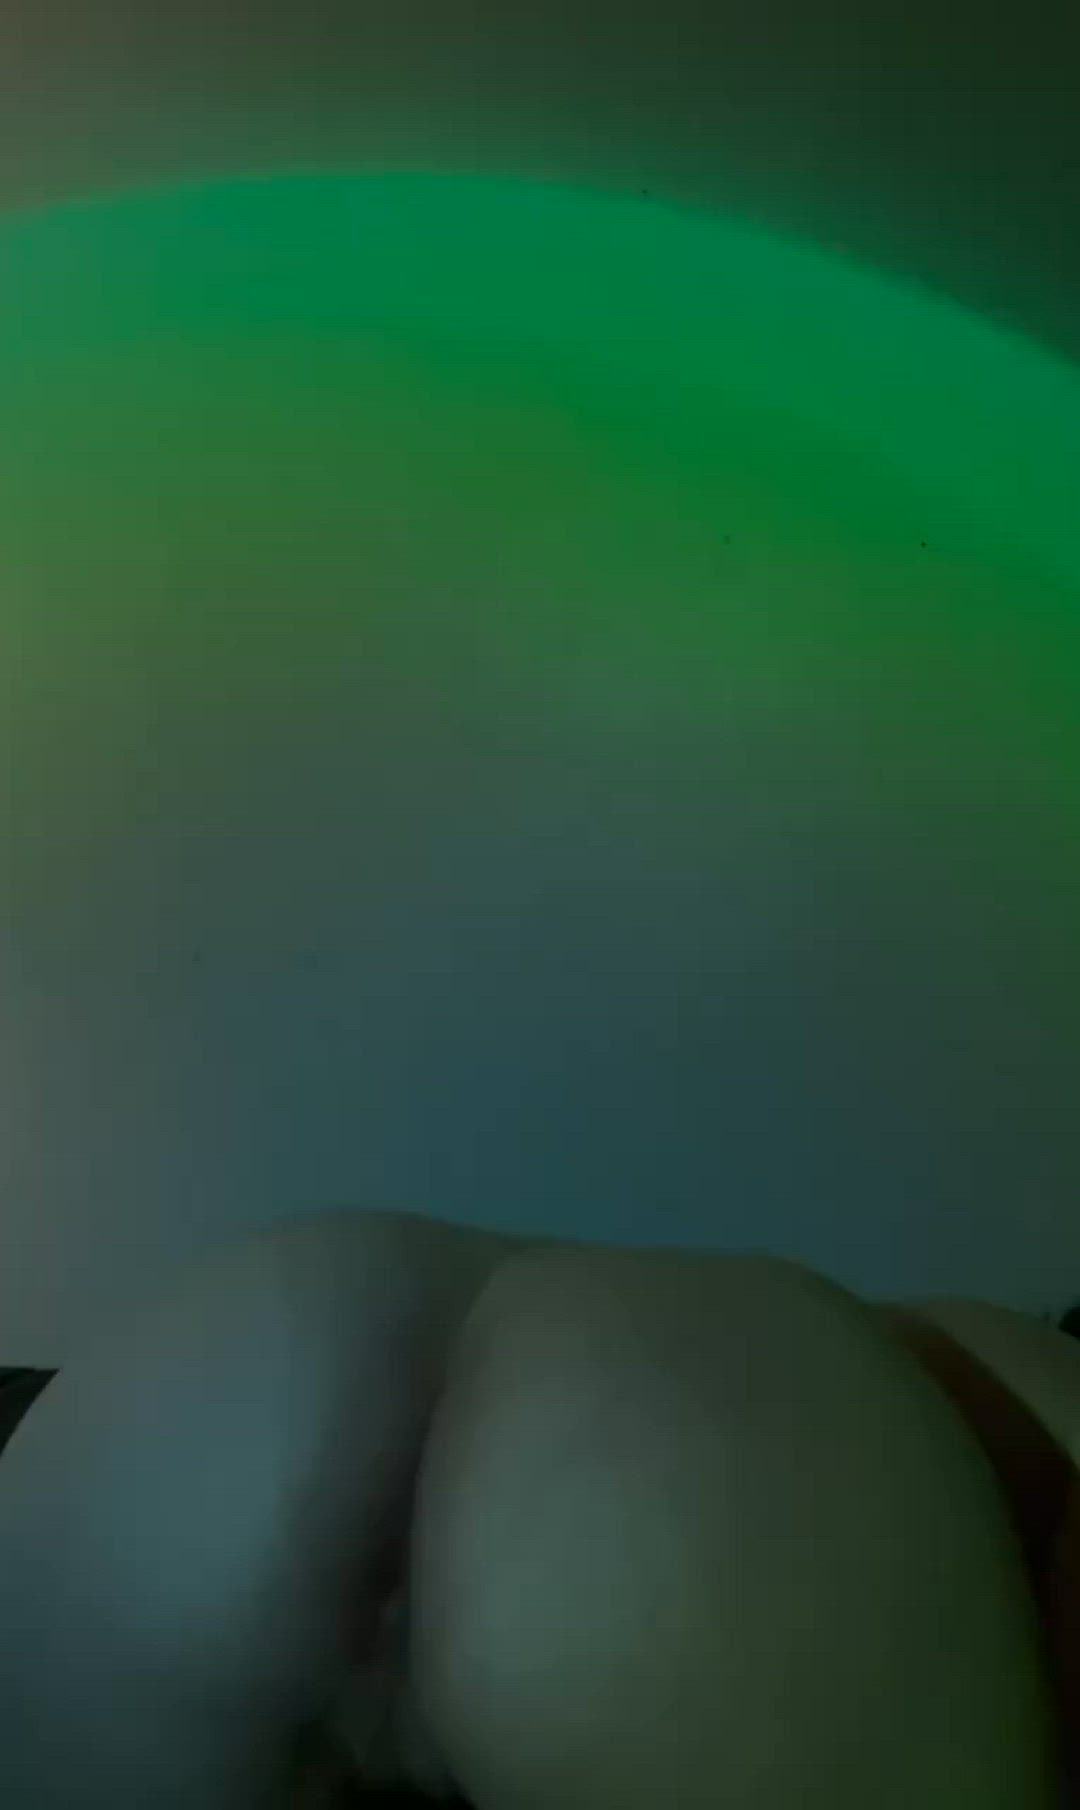 Ass porn video with onlyfans model dulcecollazo <strong>@dulcecollazo</strong>